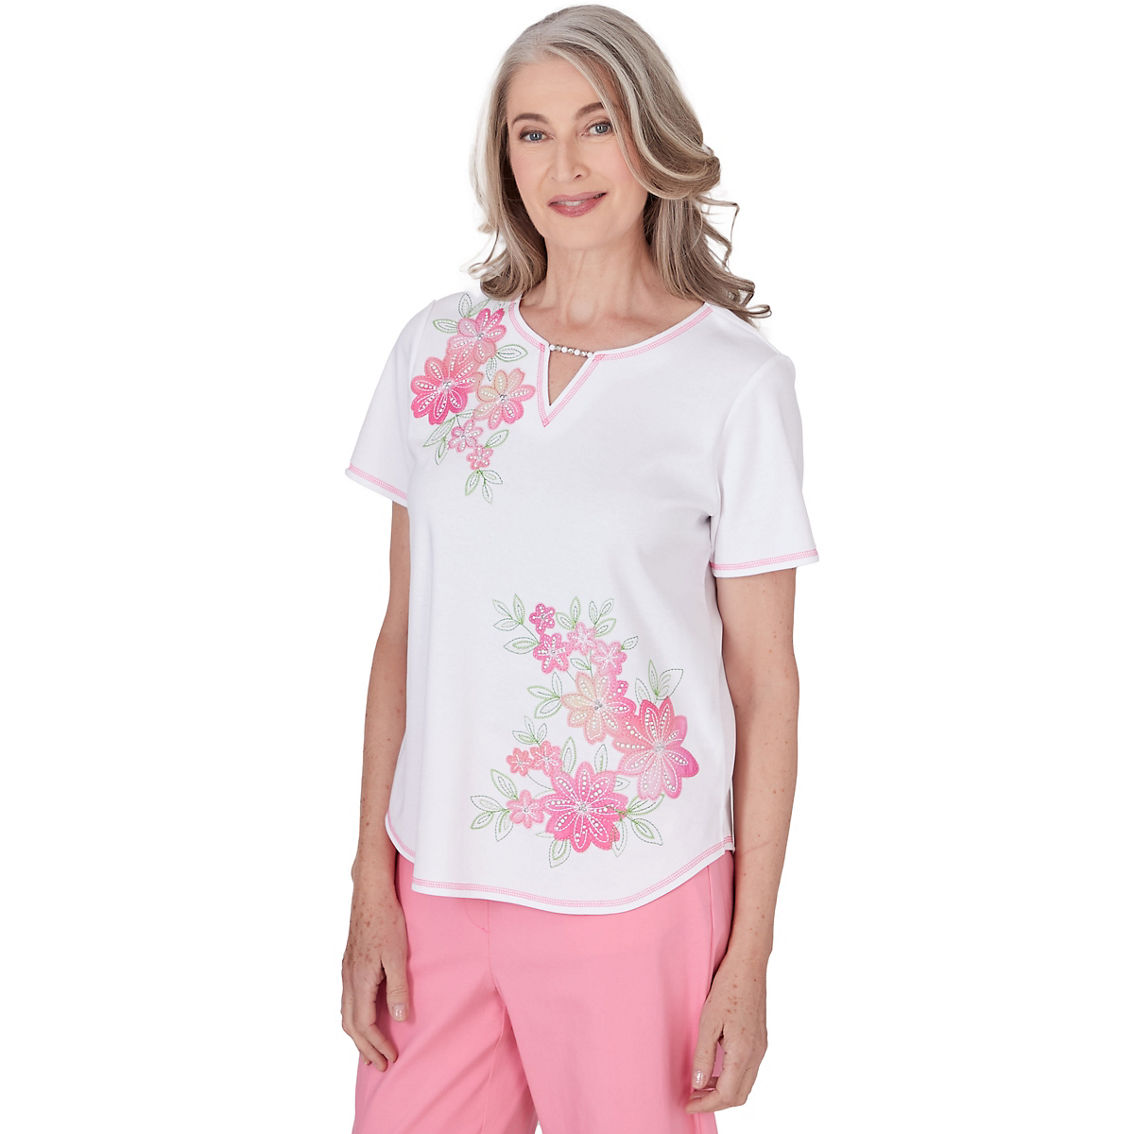 Alfred Dunner Petite Miami Beach Women's Short Sleeve Floral Applique Top - Image 3 of 5